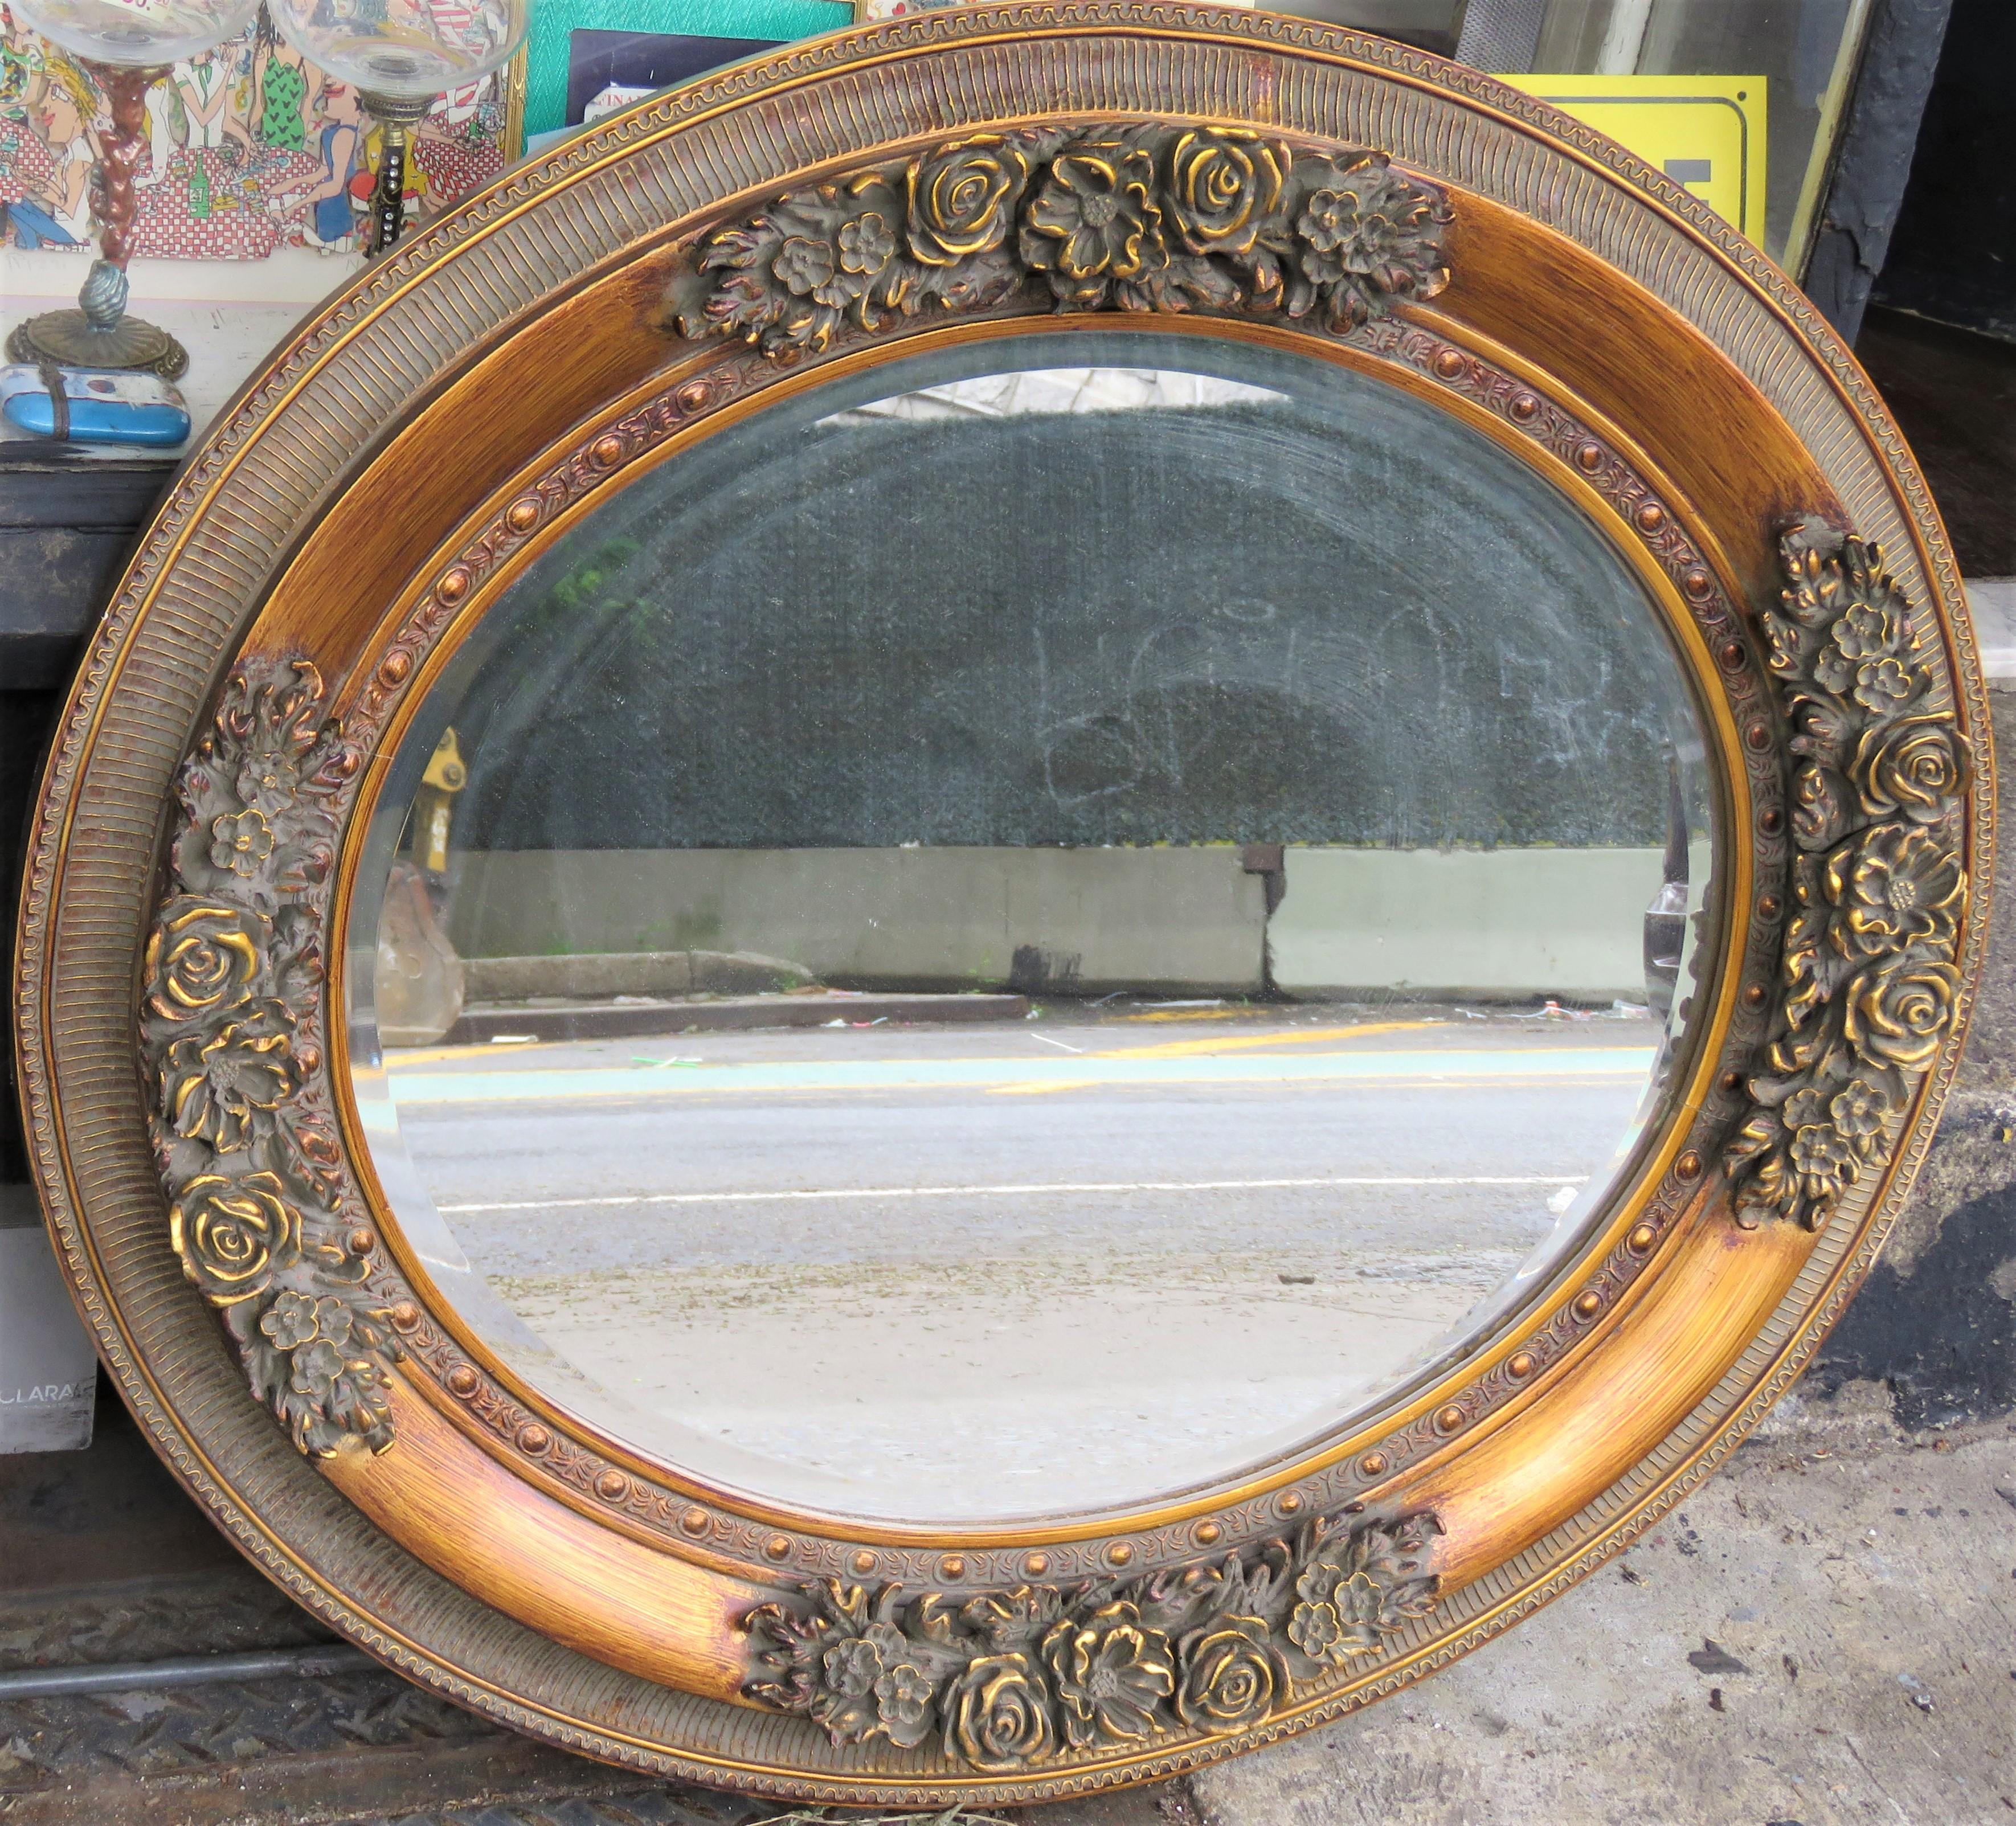 The Following Item we are Offering is A Rare Important Spectacular Estate Large Carved Wooden French Flower Mirror. Mirror is Carved with Exquisite and Elaborate Ornate Flower Detail. Taken out of an Important $2 Million Dollar Brooklyn, NY Estate.